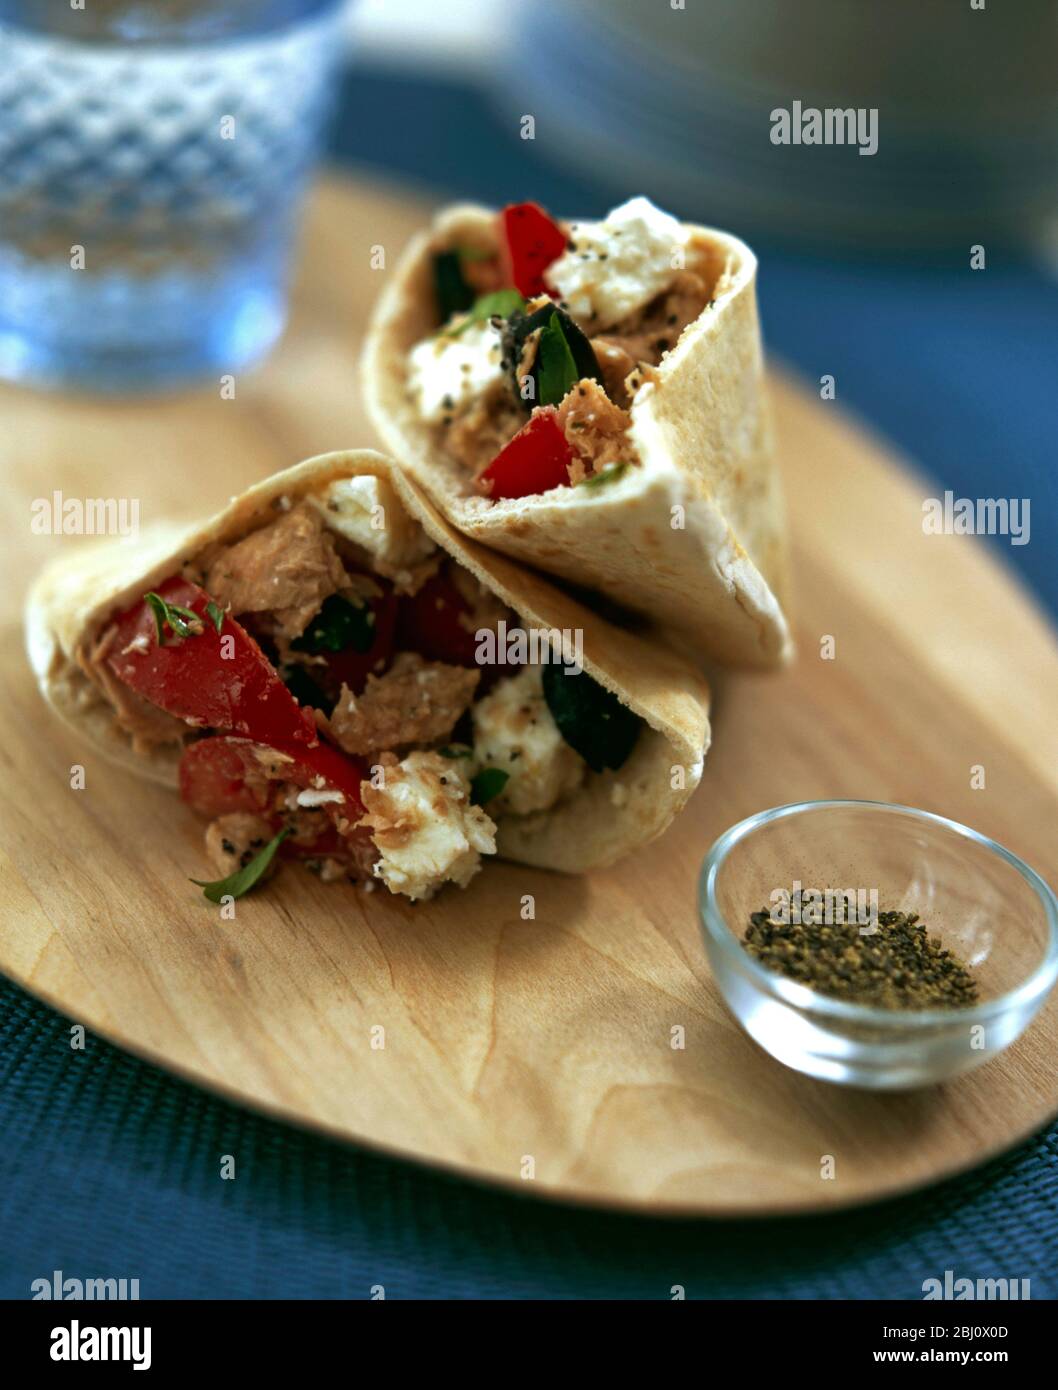 Pitta bread cut into pockets stuffed with salad of tomatoes, tuna and feta on wooden board with small glass bowl of crushed black pepper - Stock Photo